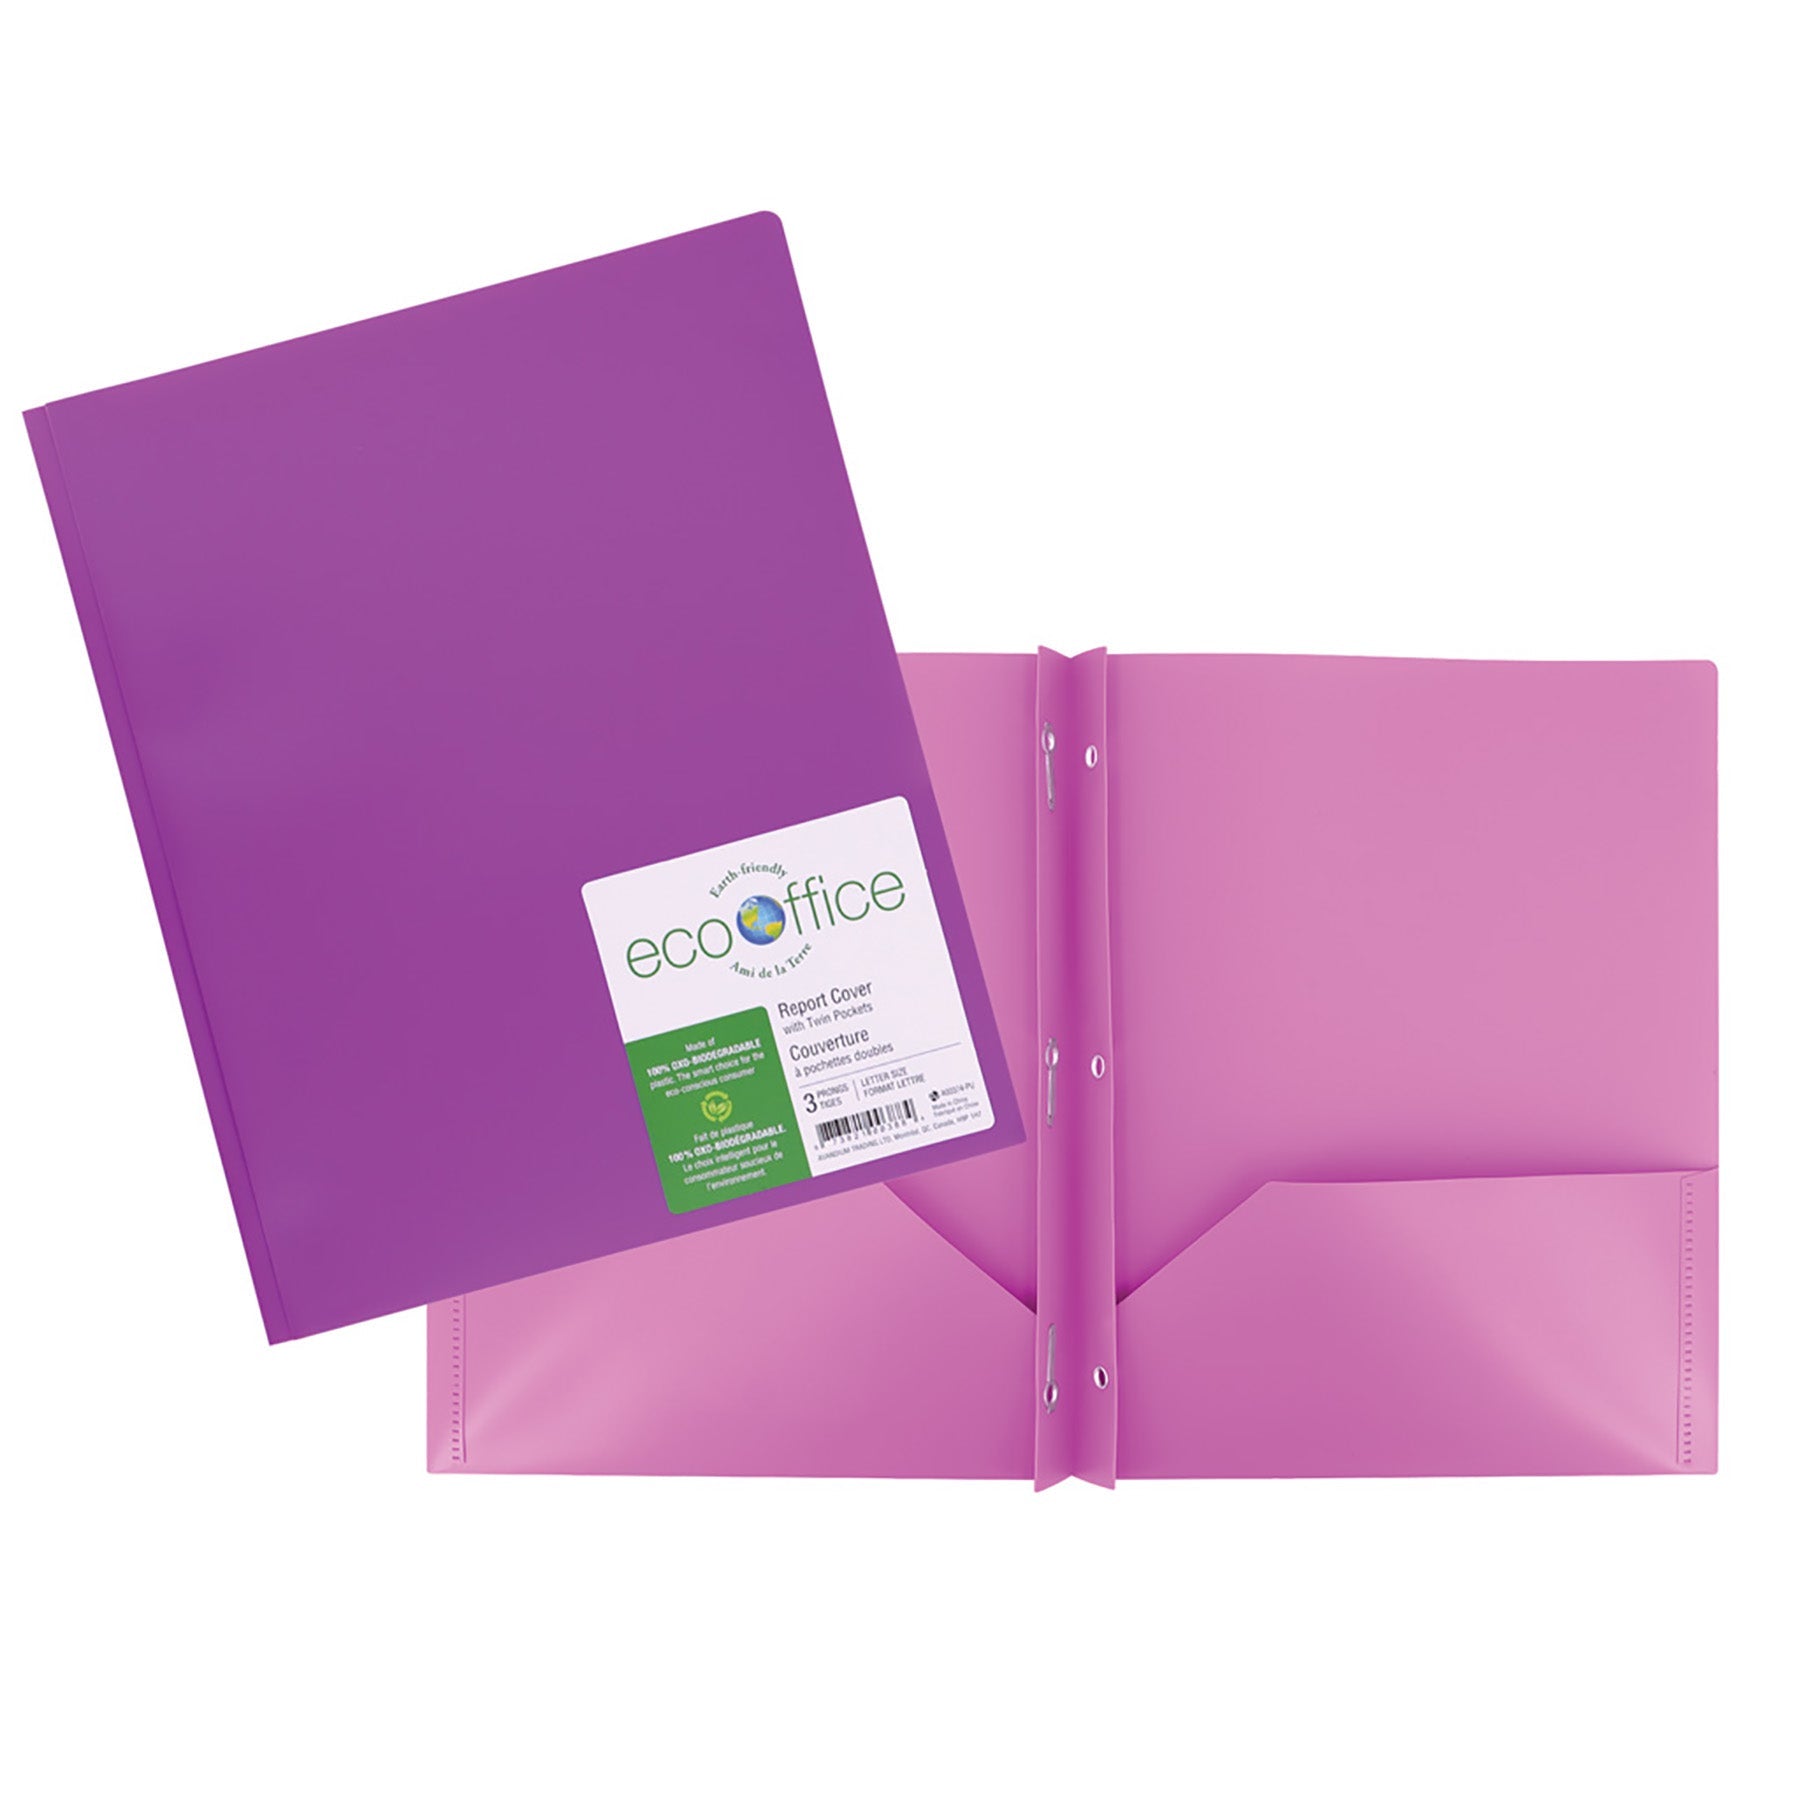 EcoOffice 3-Prong Report Cover 2 Pockets Purple Plastic 11.25x9.25in